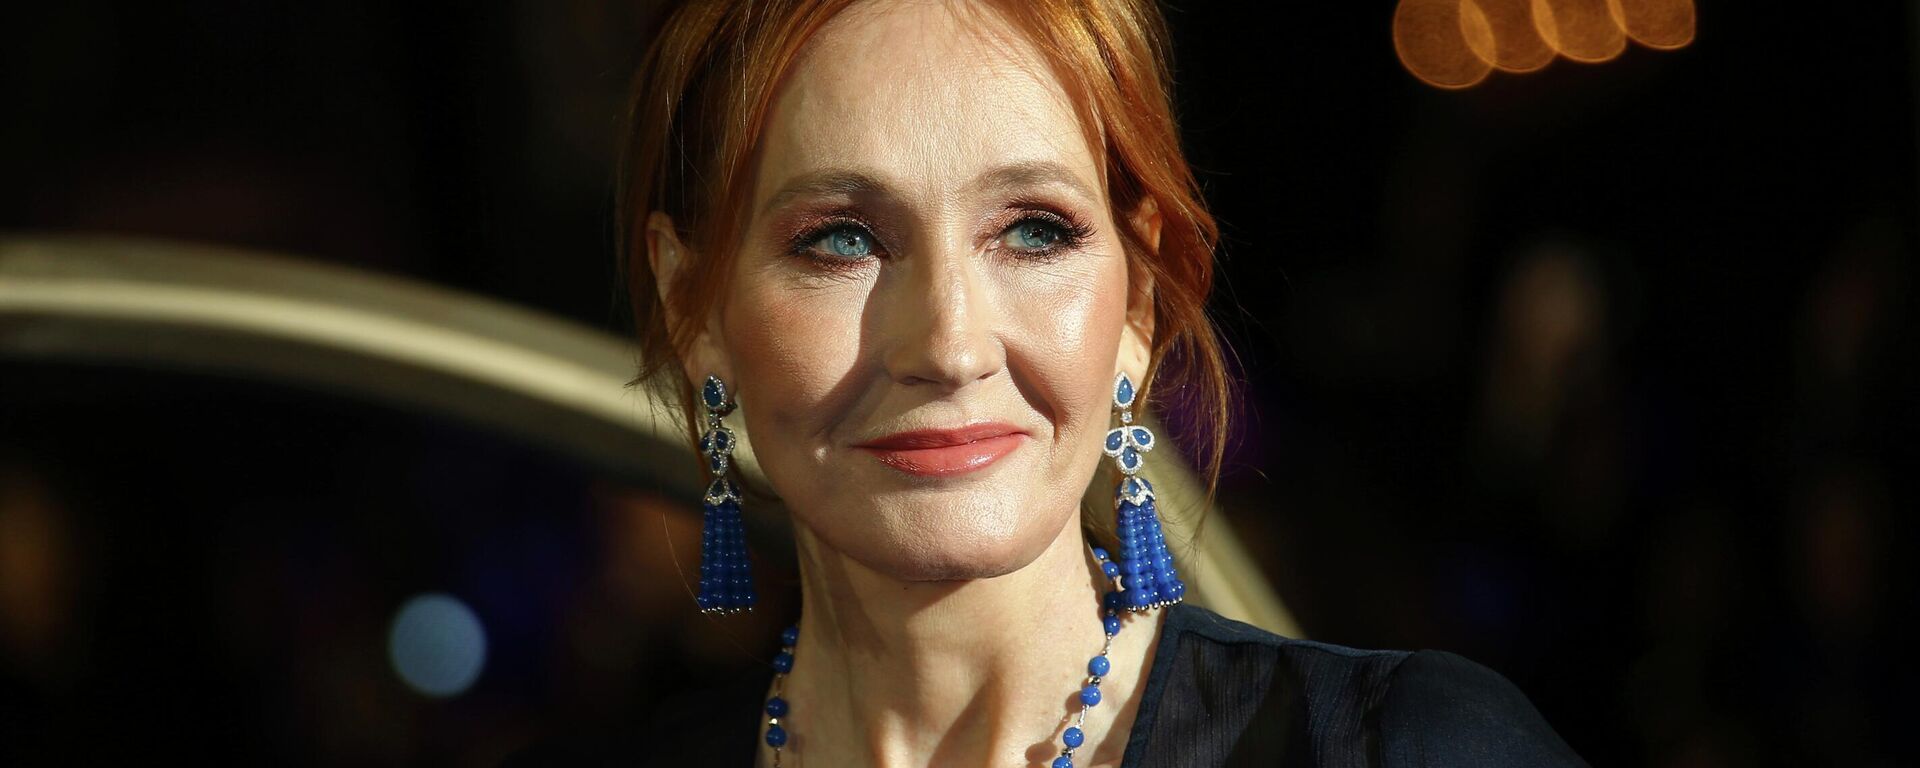 In this Nov. 13, 2018 file photo, author J.K. Rowling poses for photographers upon her arrival at the premiere of the film 'Fantastic Beasts: The Crimes of Grindelwald', in London.  - Sputnik International, 1920, 27.09.2022